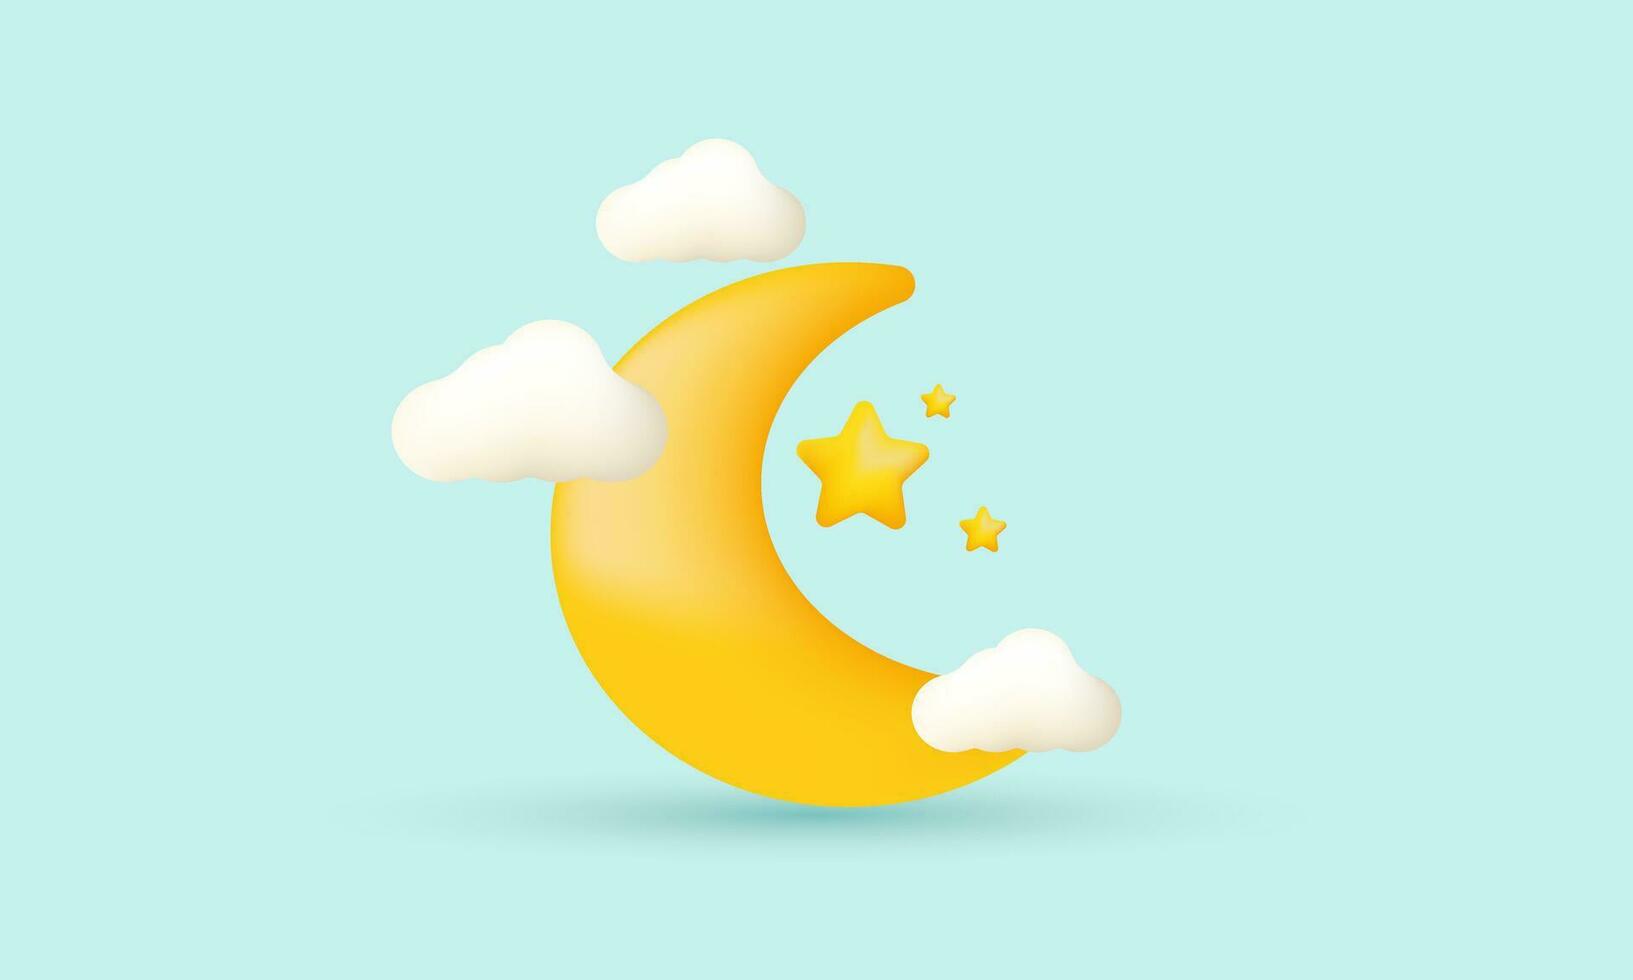 unique 3d style crescent moon cloud star half icon trendy style symbols isolated on background vector